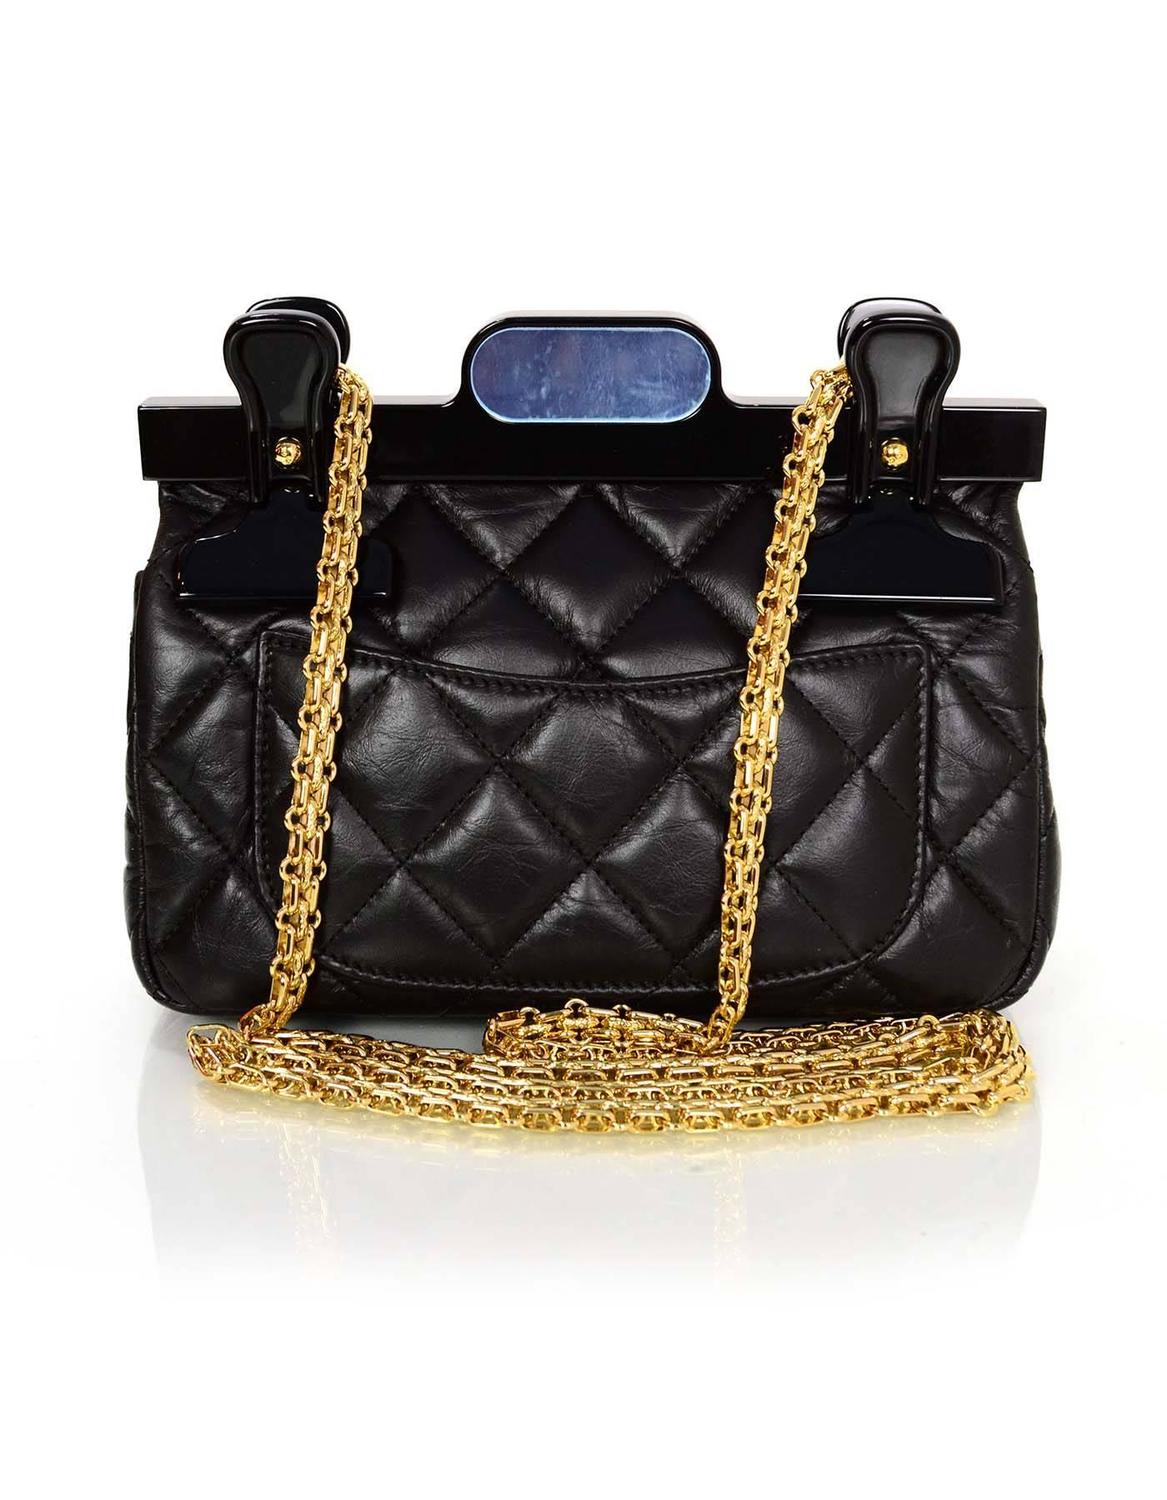 Chanel New 2016 Quilted Calfskin Leather 2.55 CC Hanger Crossbody Bag For Sale at 1stdibs